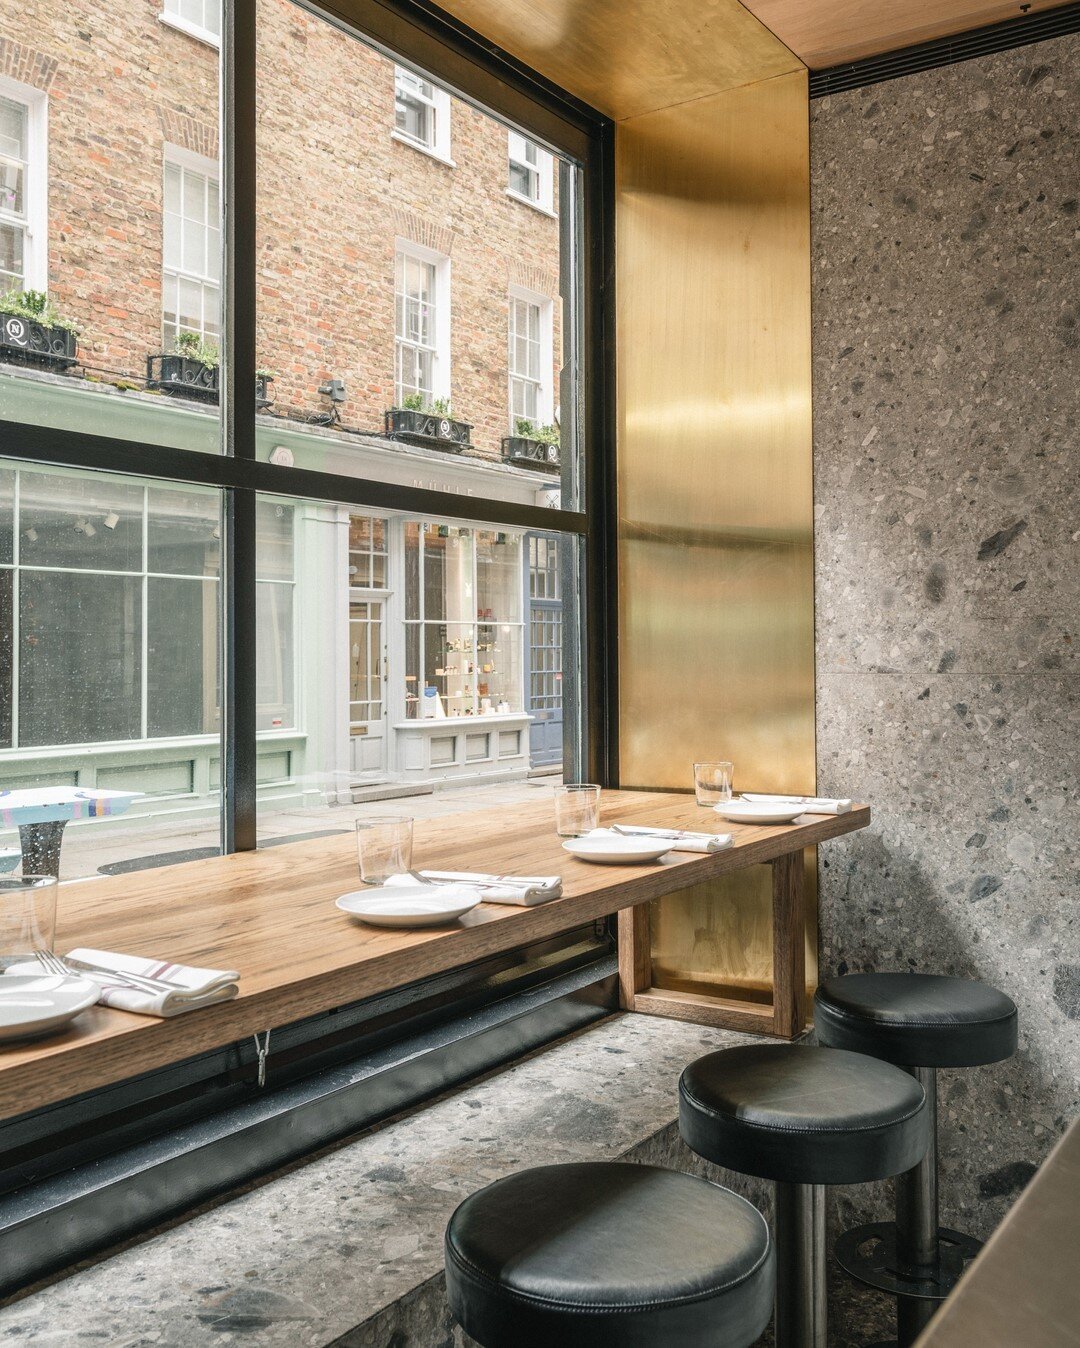 Today's dining starter kit:

- Fantastic Greek food⠀⠀⠀⠀⠀⠀⠀⠀⠀
- Superb interiors and design*⠀⠀⠀⠀⠀⠀⠀⠀⠀
- Prime viewing⠀⠀⠀⠀⠀⠀⠀⠀⠀
- Air conditioning

No out of office required. You'll find us at @inogastrobar; the hottest new opening in Soho, London..

*